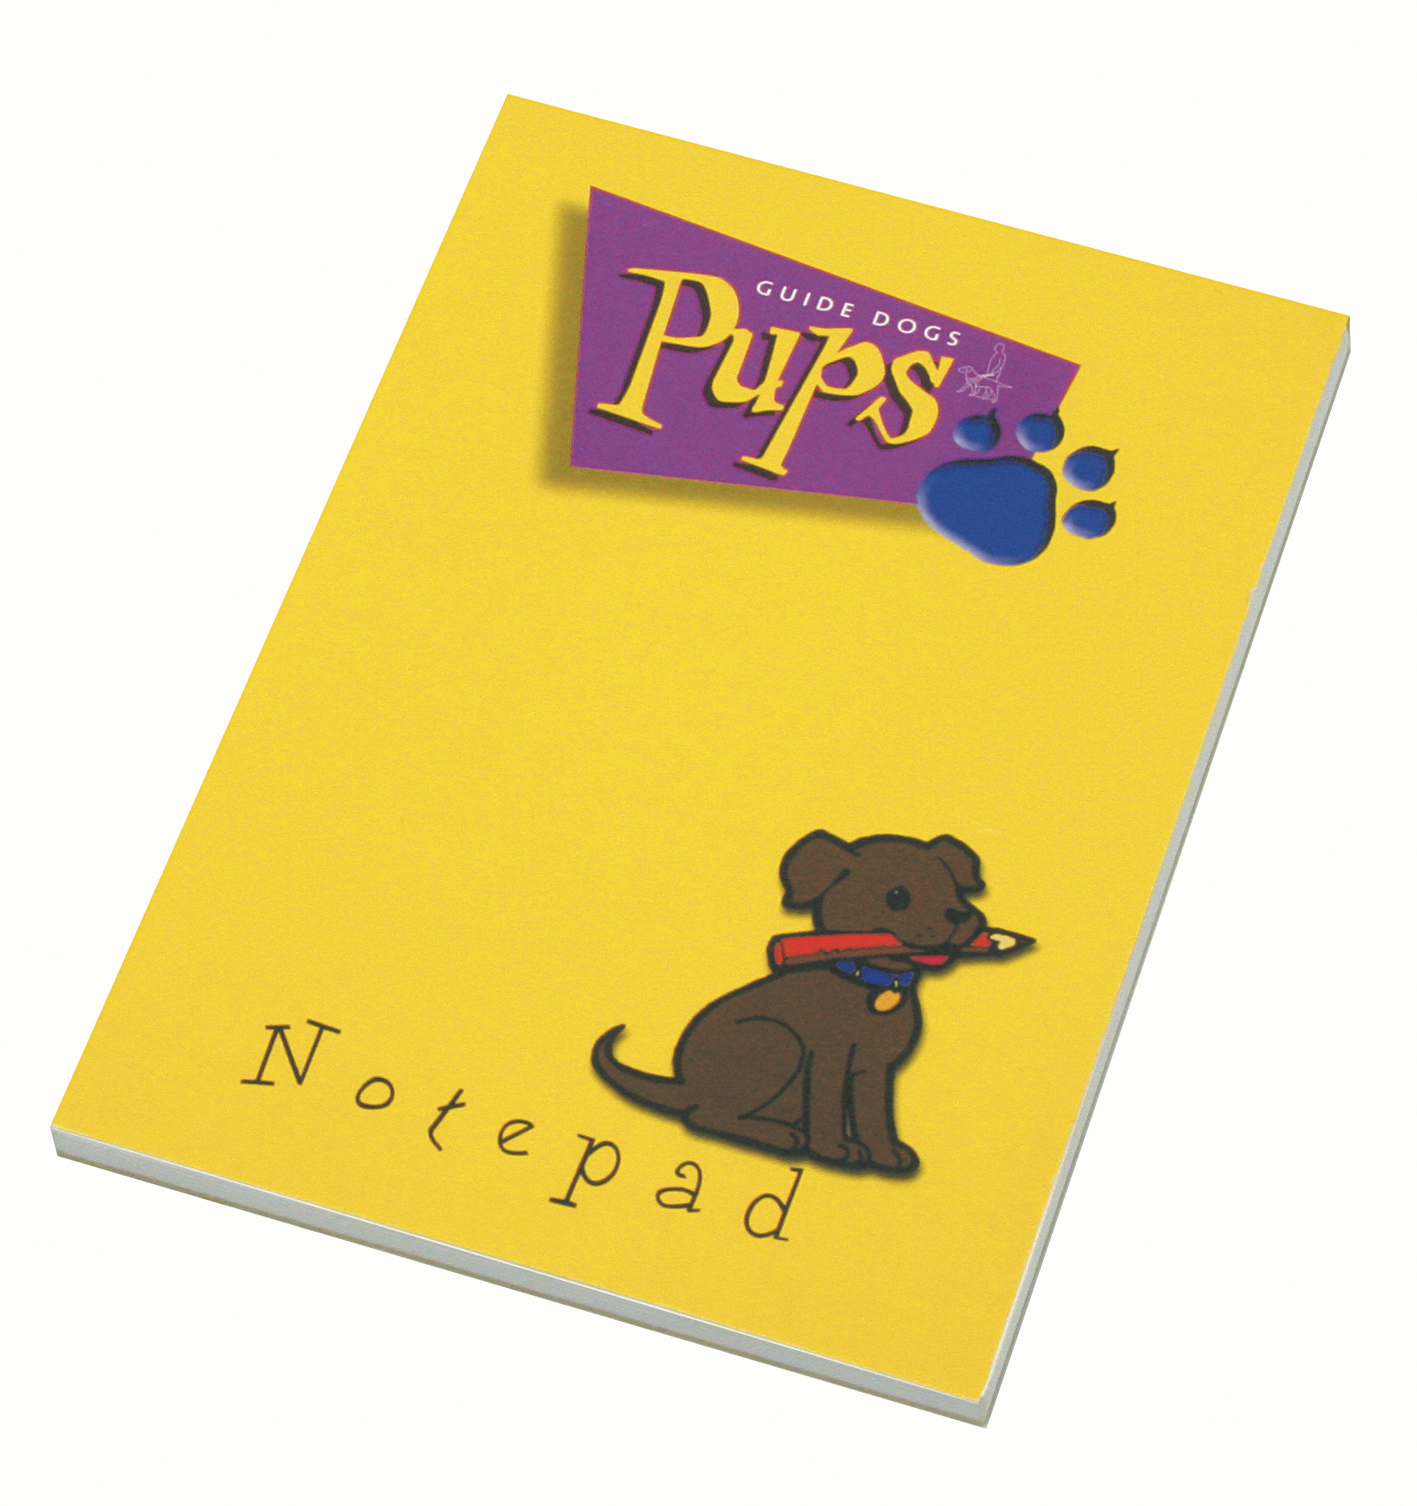 Smart Pad Cover - A5 Notepad